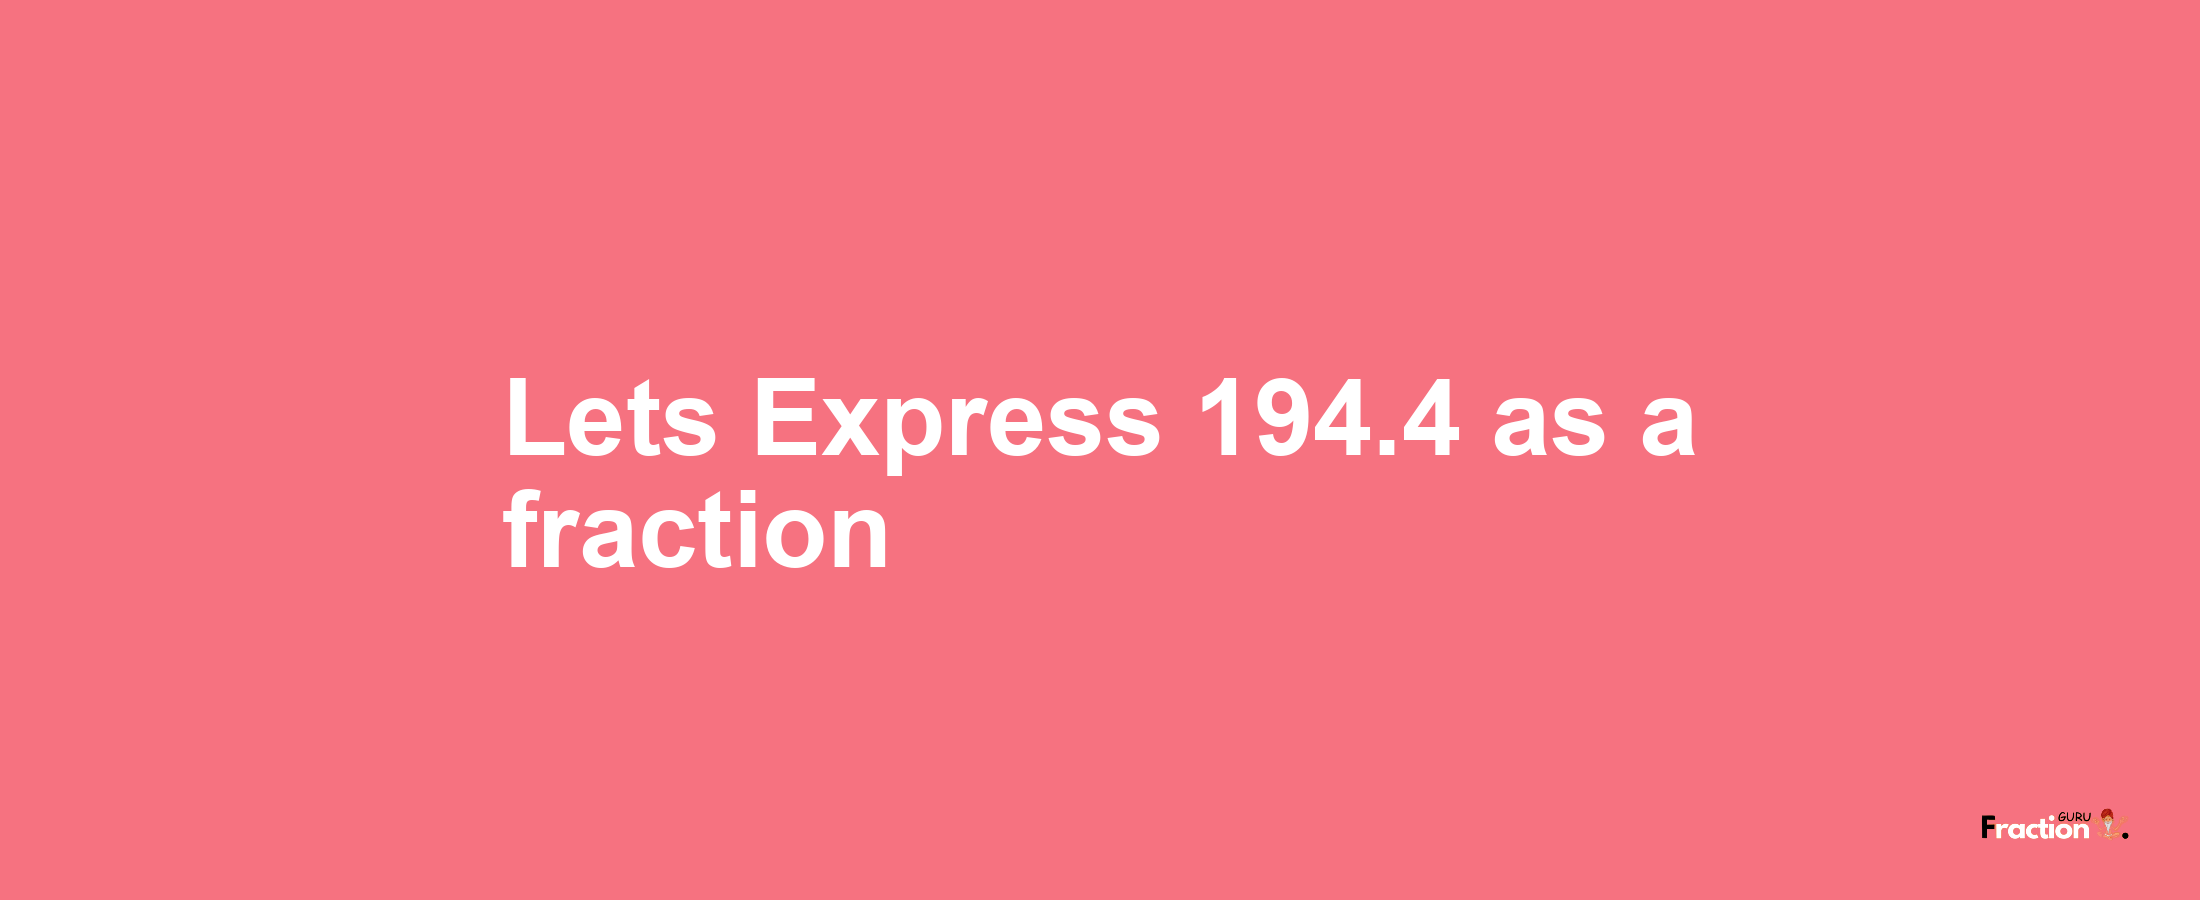 Lets Express 194.4 as afraction